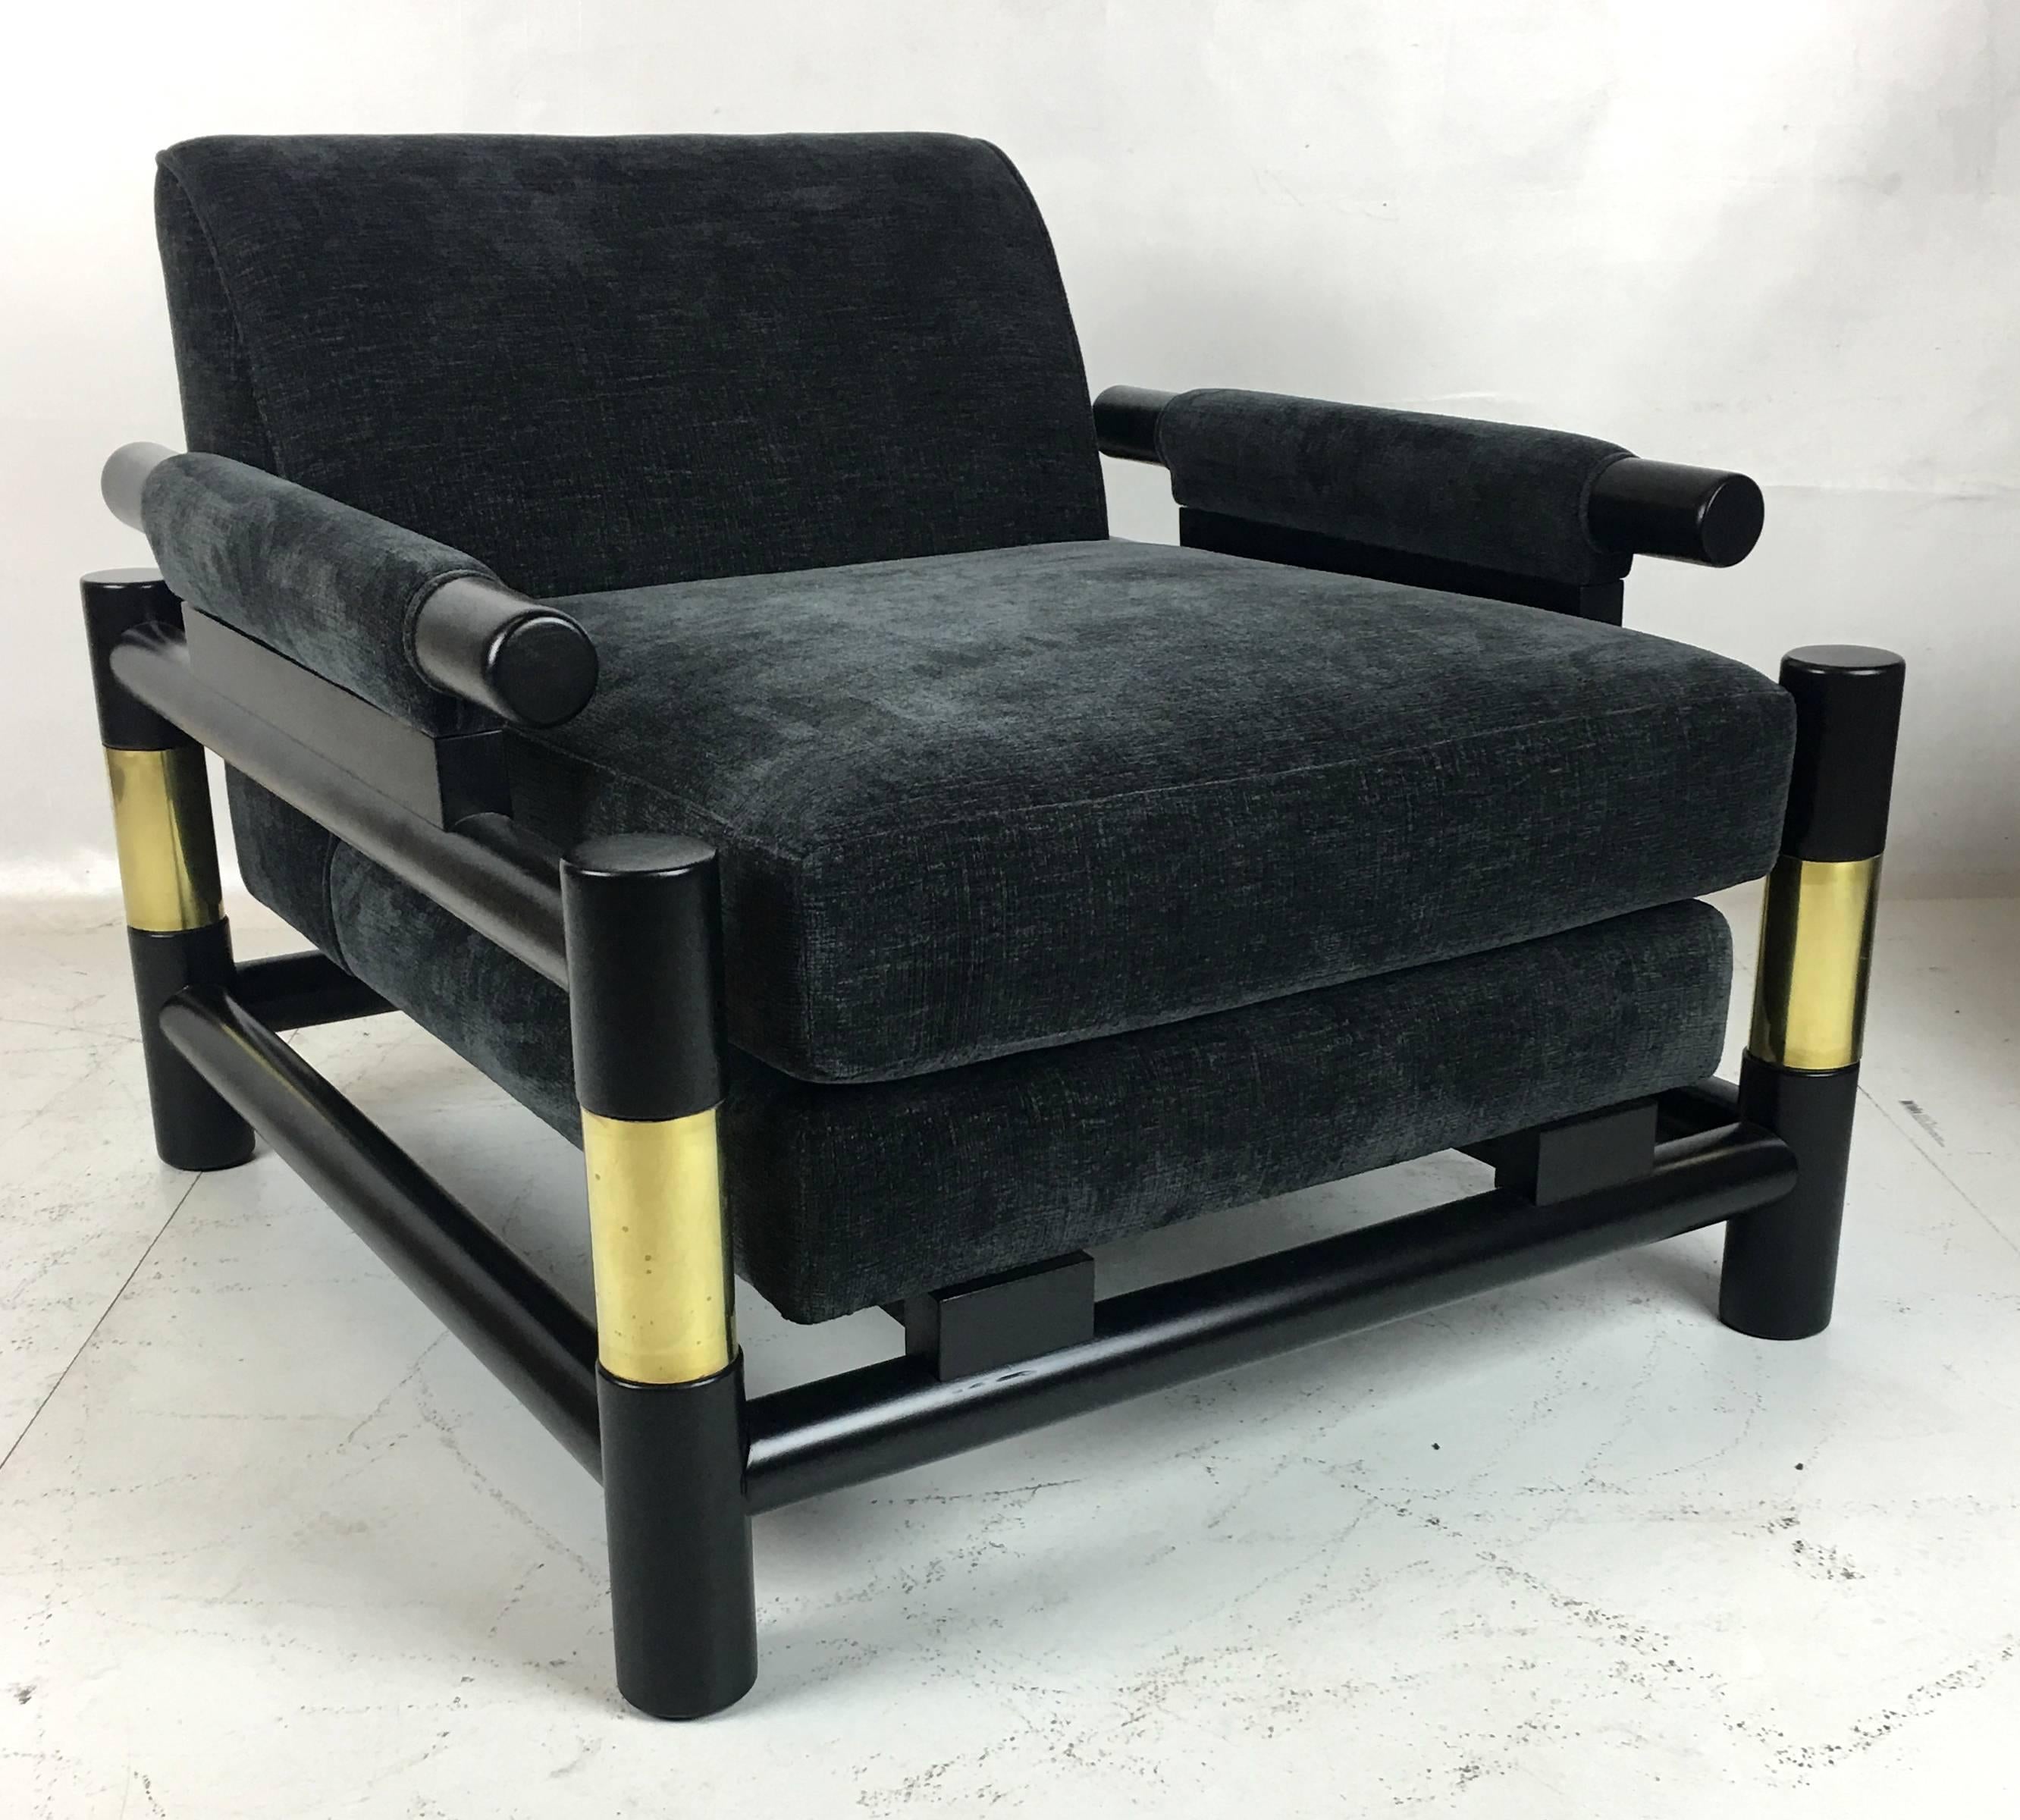 Striking pair of ebonized open frame lounge chairs in the style of Paul Laszlo with large diameter dowel frame. The pair have been painstakingly restored; refinished, brass polished, and reupholstered in luxurious charcoal grey chenille. Highest